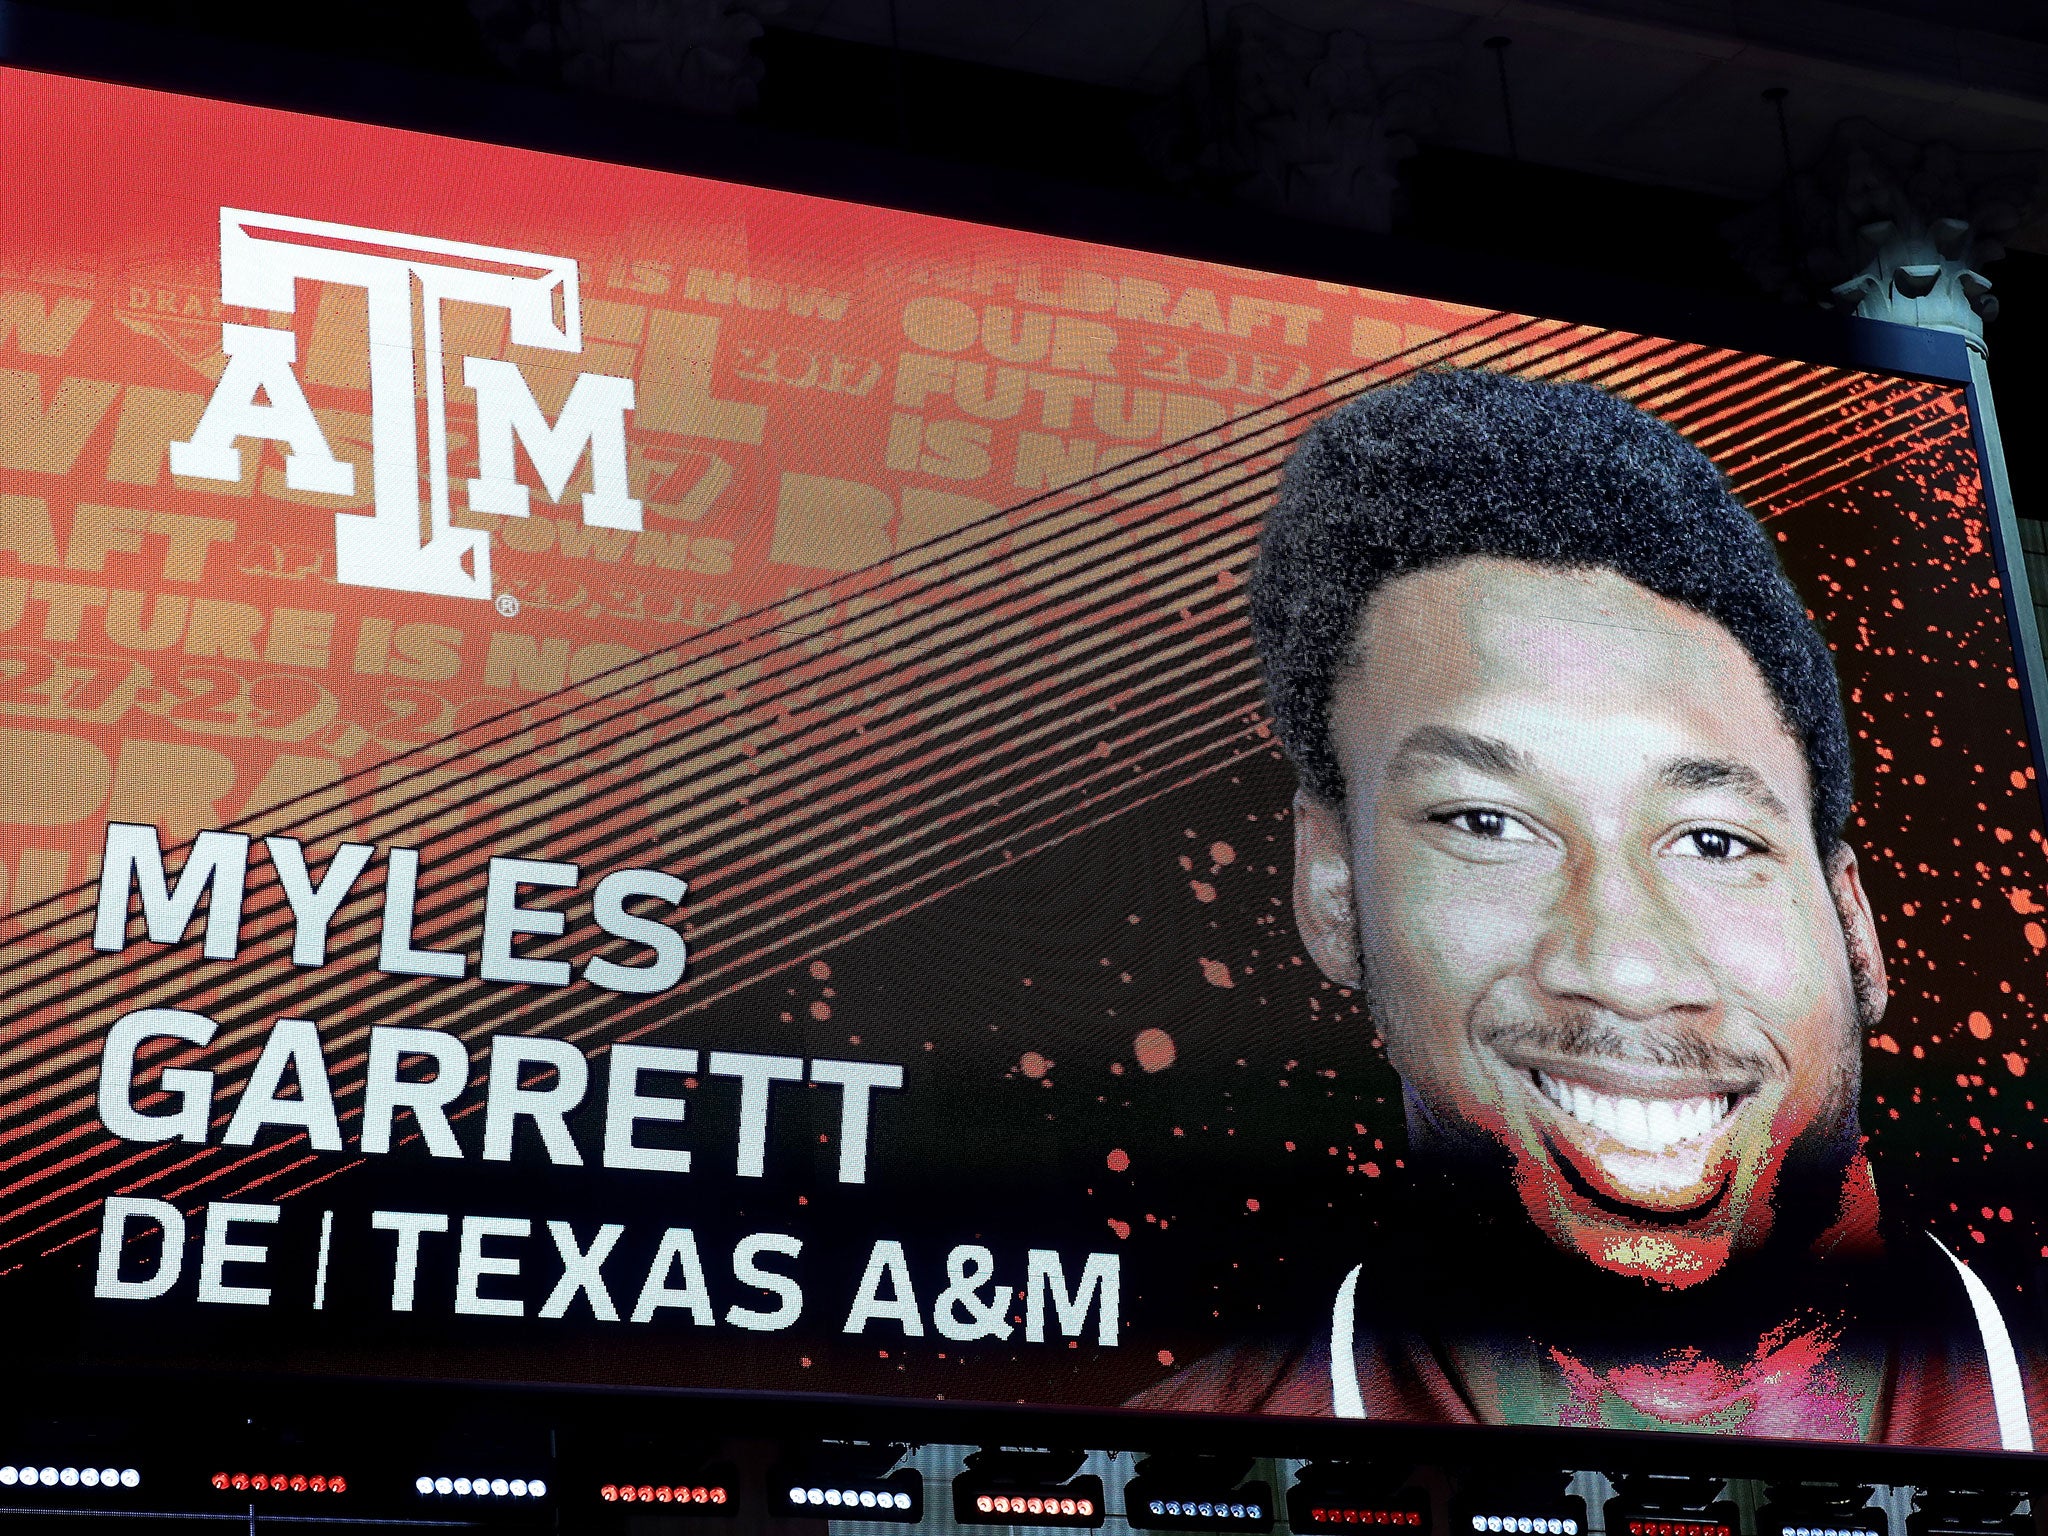 Myles Garrett was selected as the first round pick for the Cleveland Browns